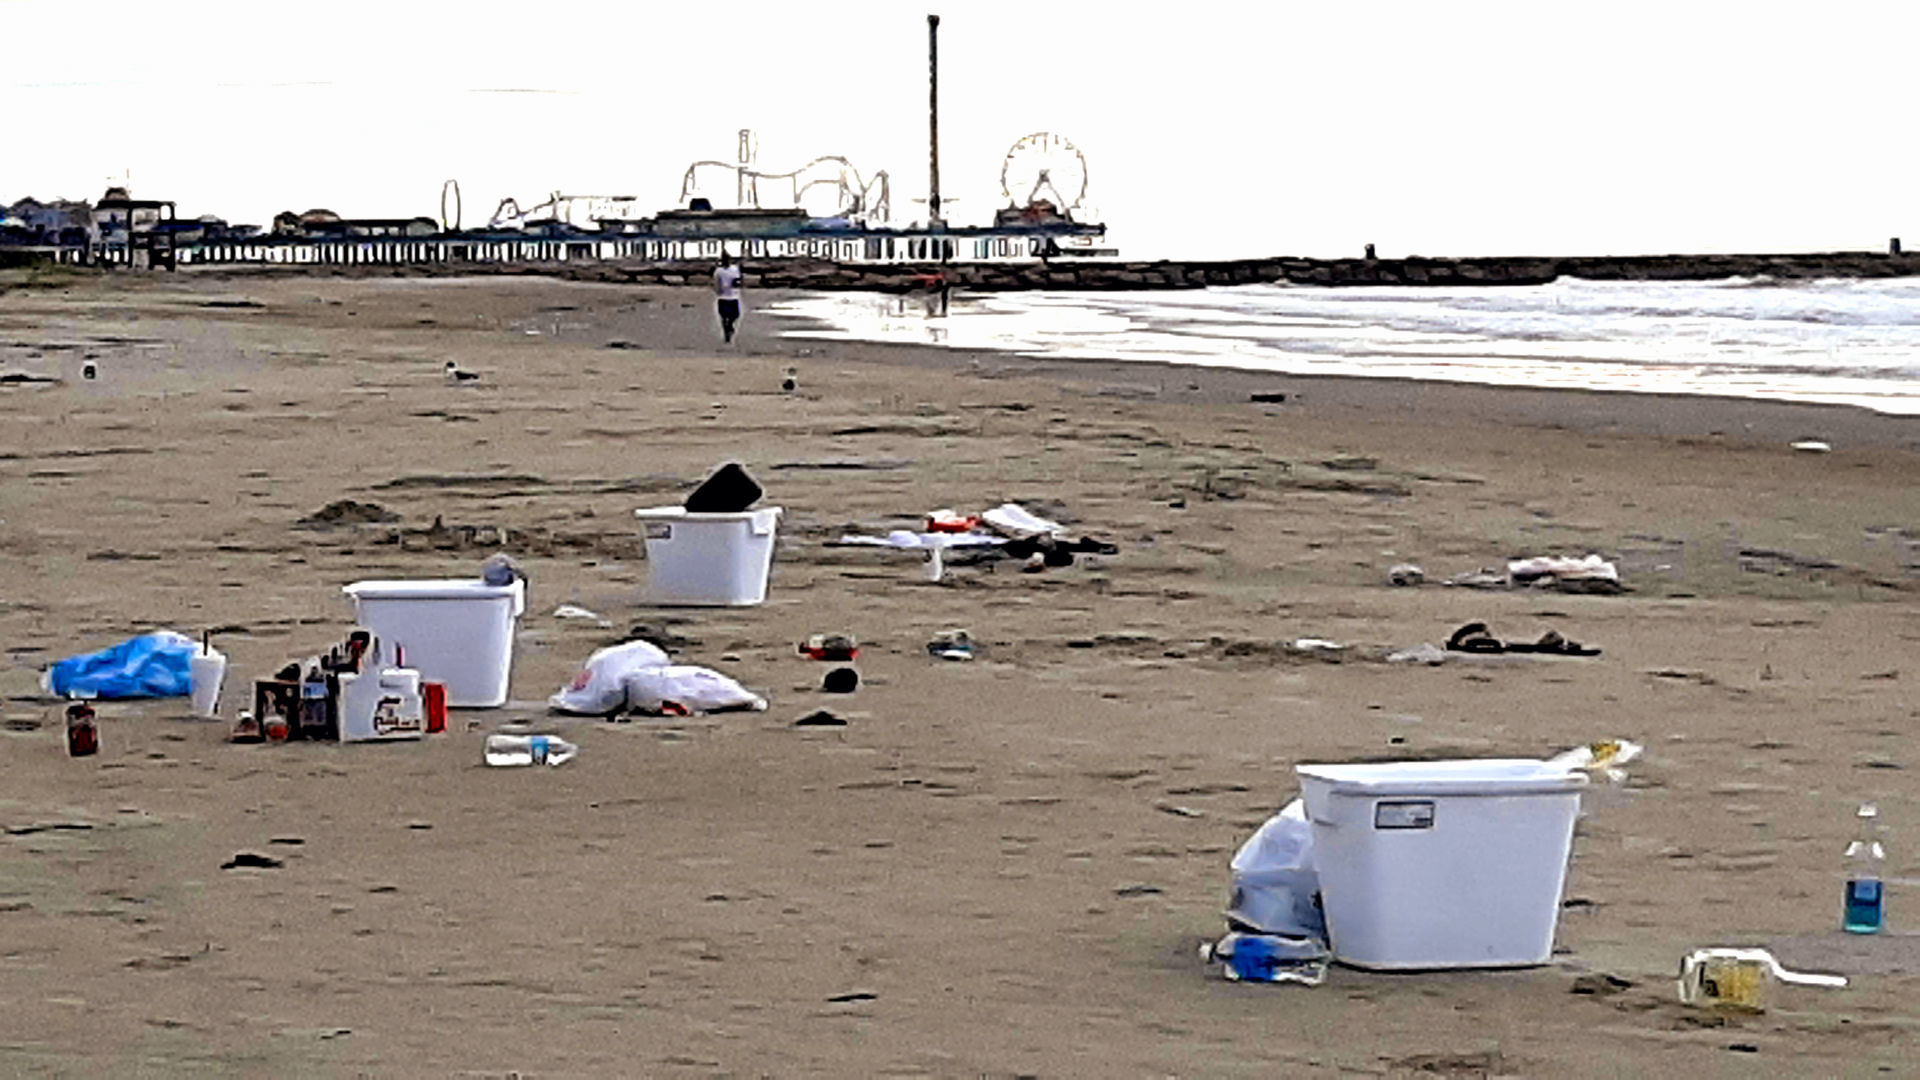 Galvestonians miffed by weekend trash on beaches, streets Local News The Daily News picture